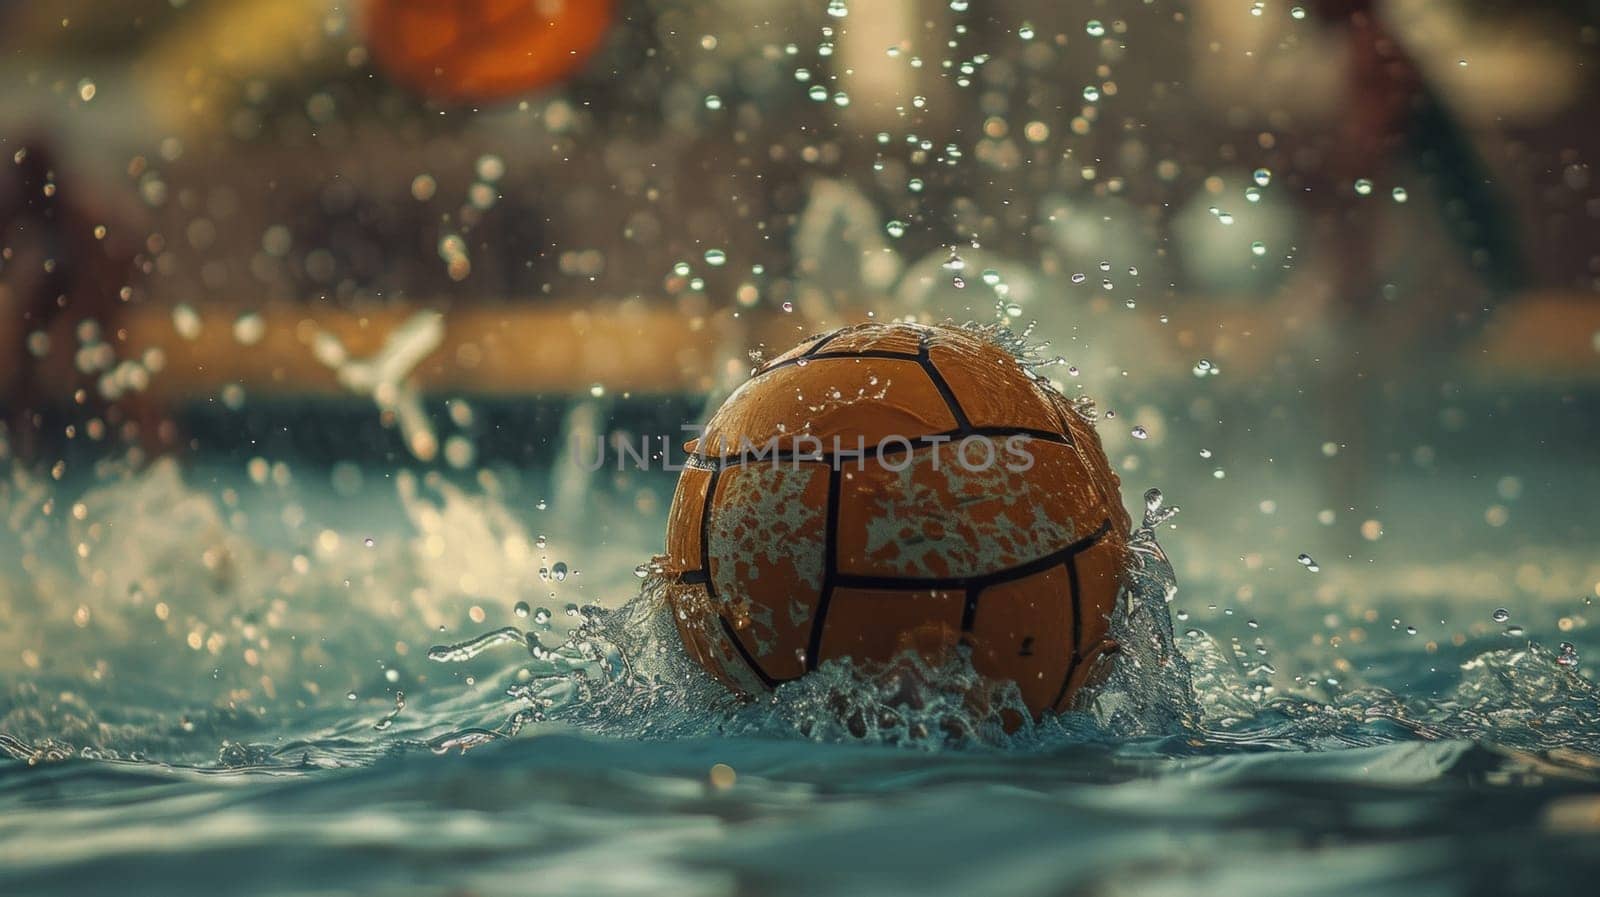 A soccer ball is being thrown into the water by a player